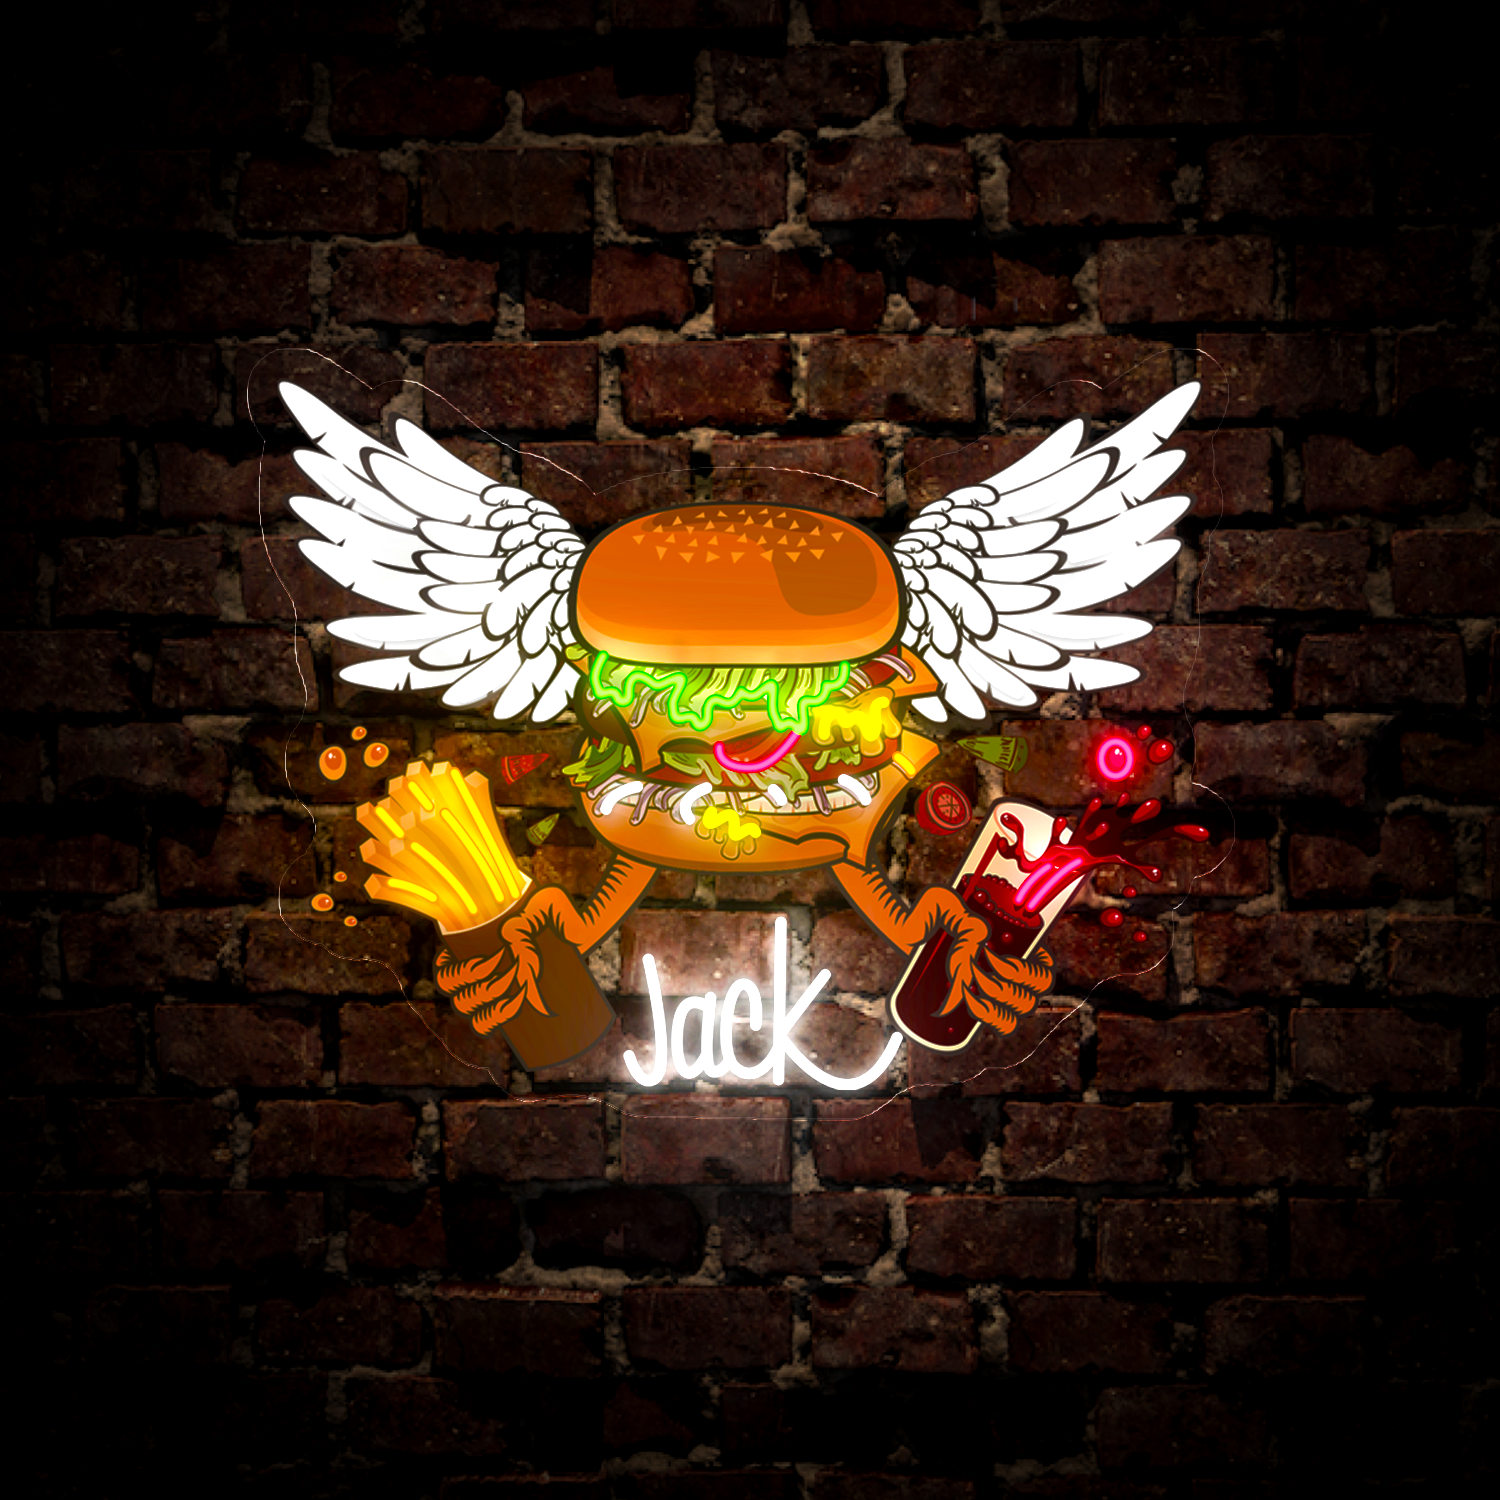 Personalized Burger Wings Name Artwork Neon Sign